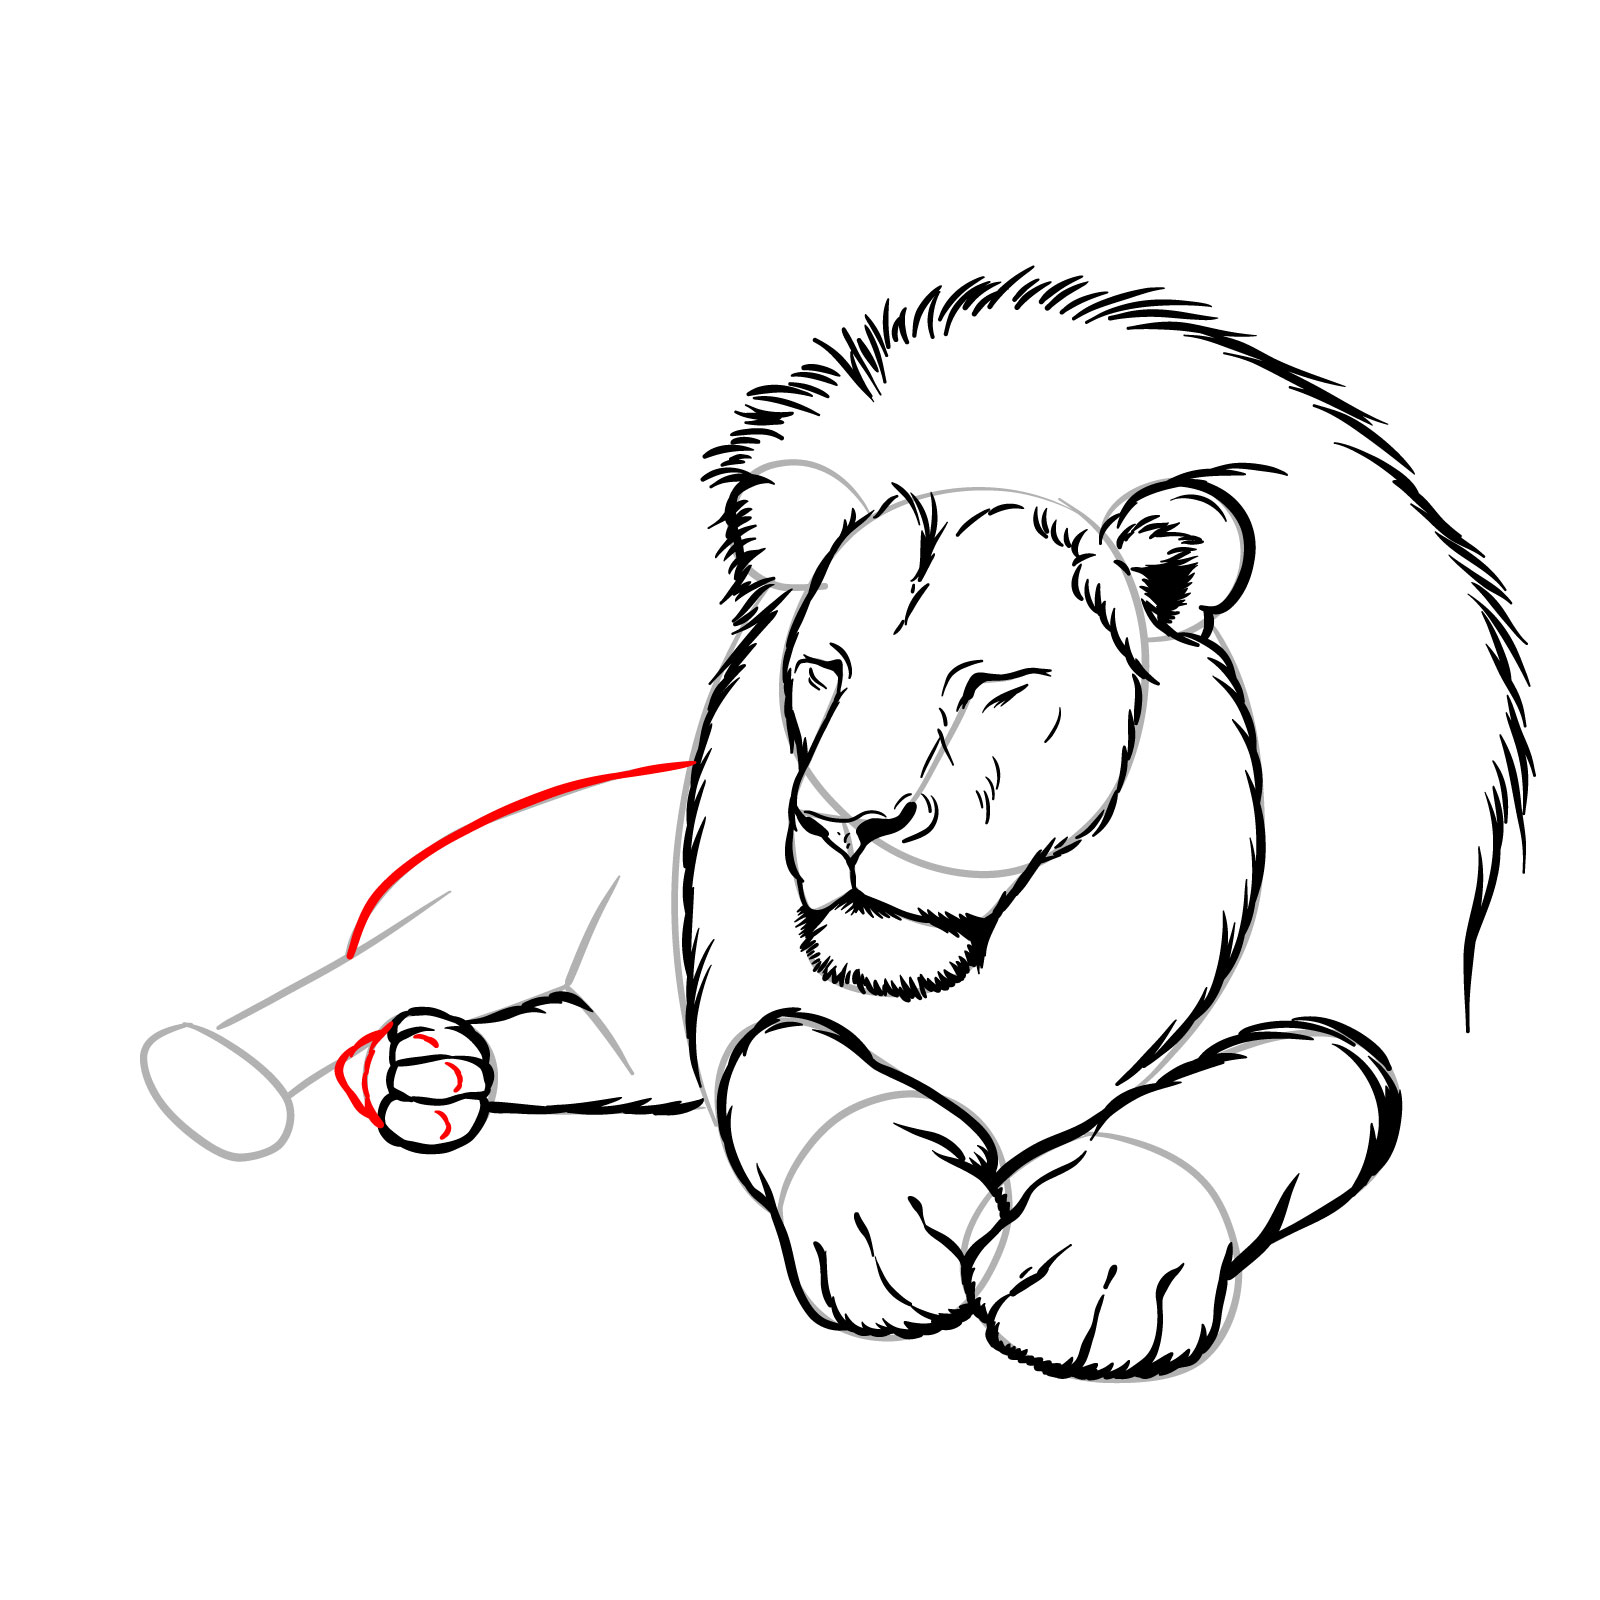 Sleeping lion drawing - Step 12: Detailing rear body and second rear leg